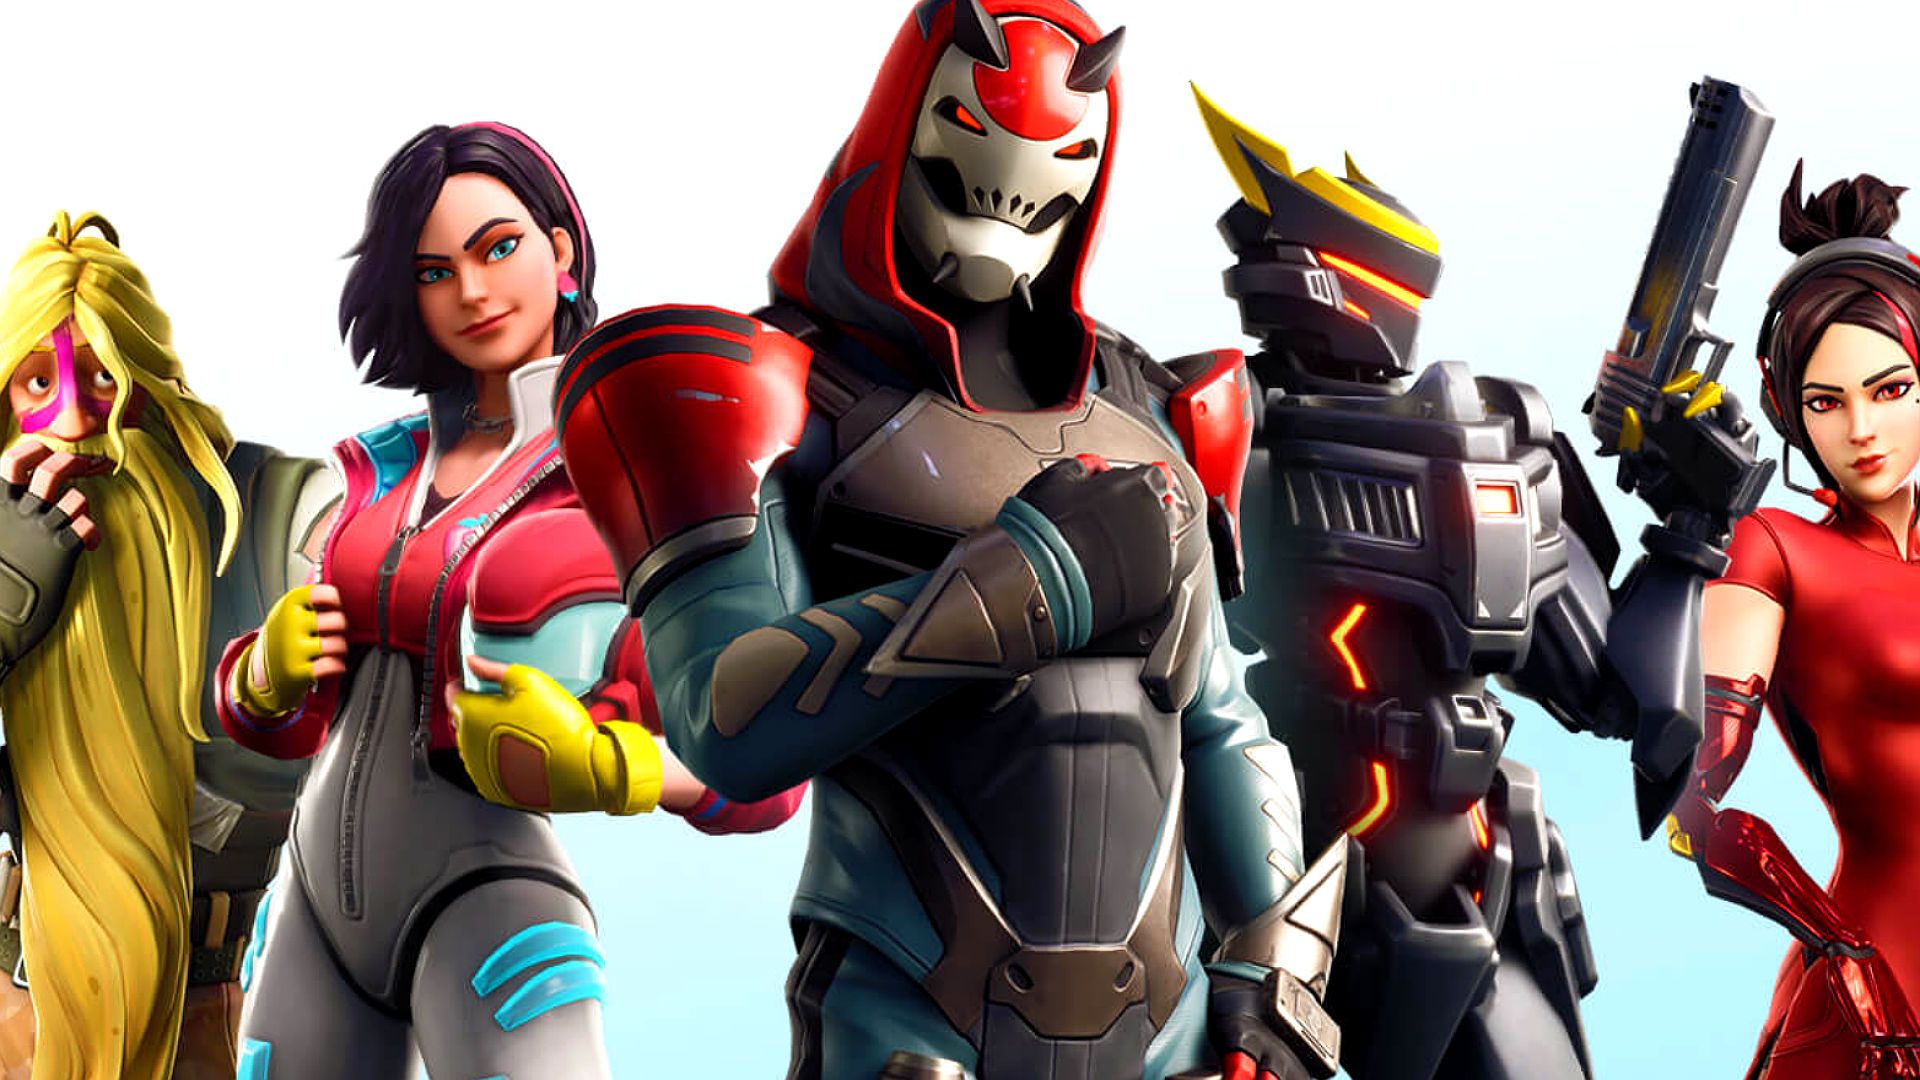 Best Fortnite skins ranked: the finest from the Fortnite item shop